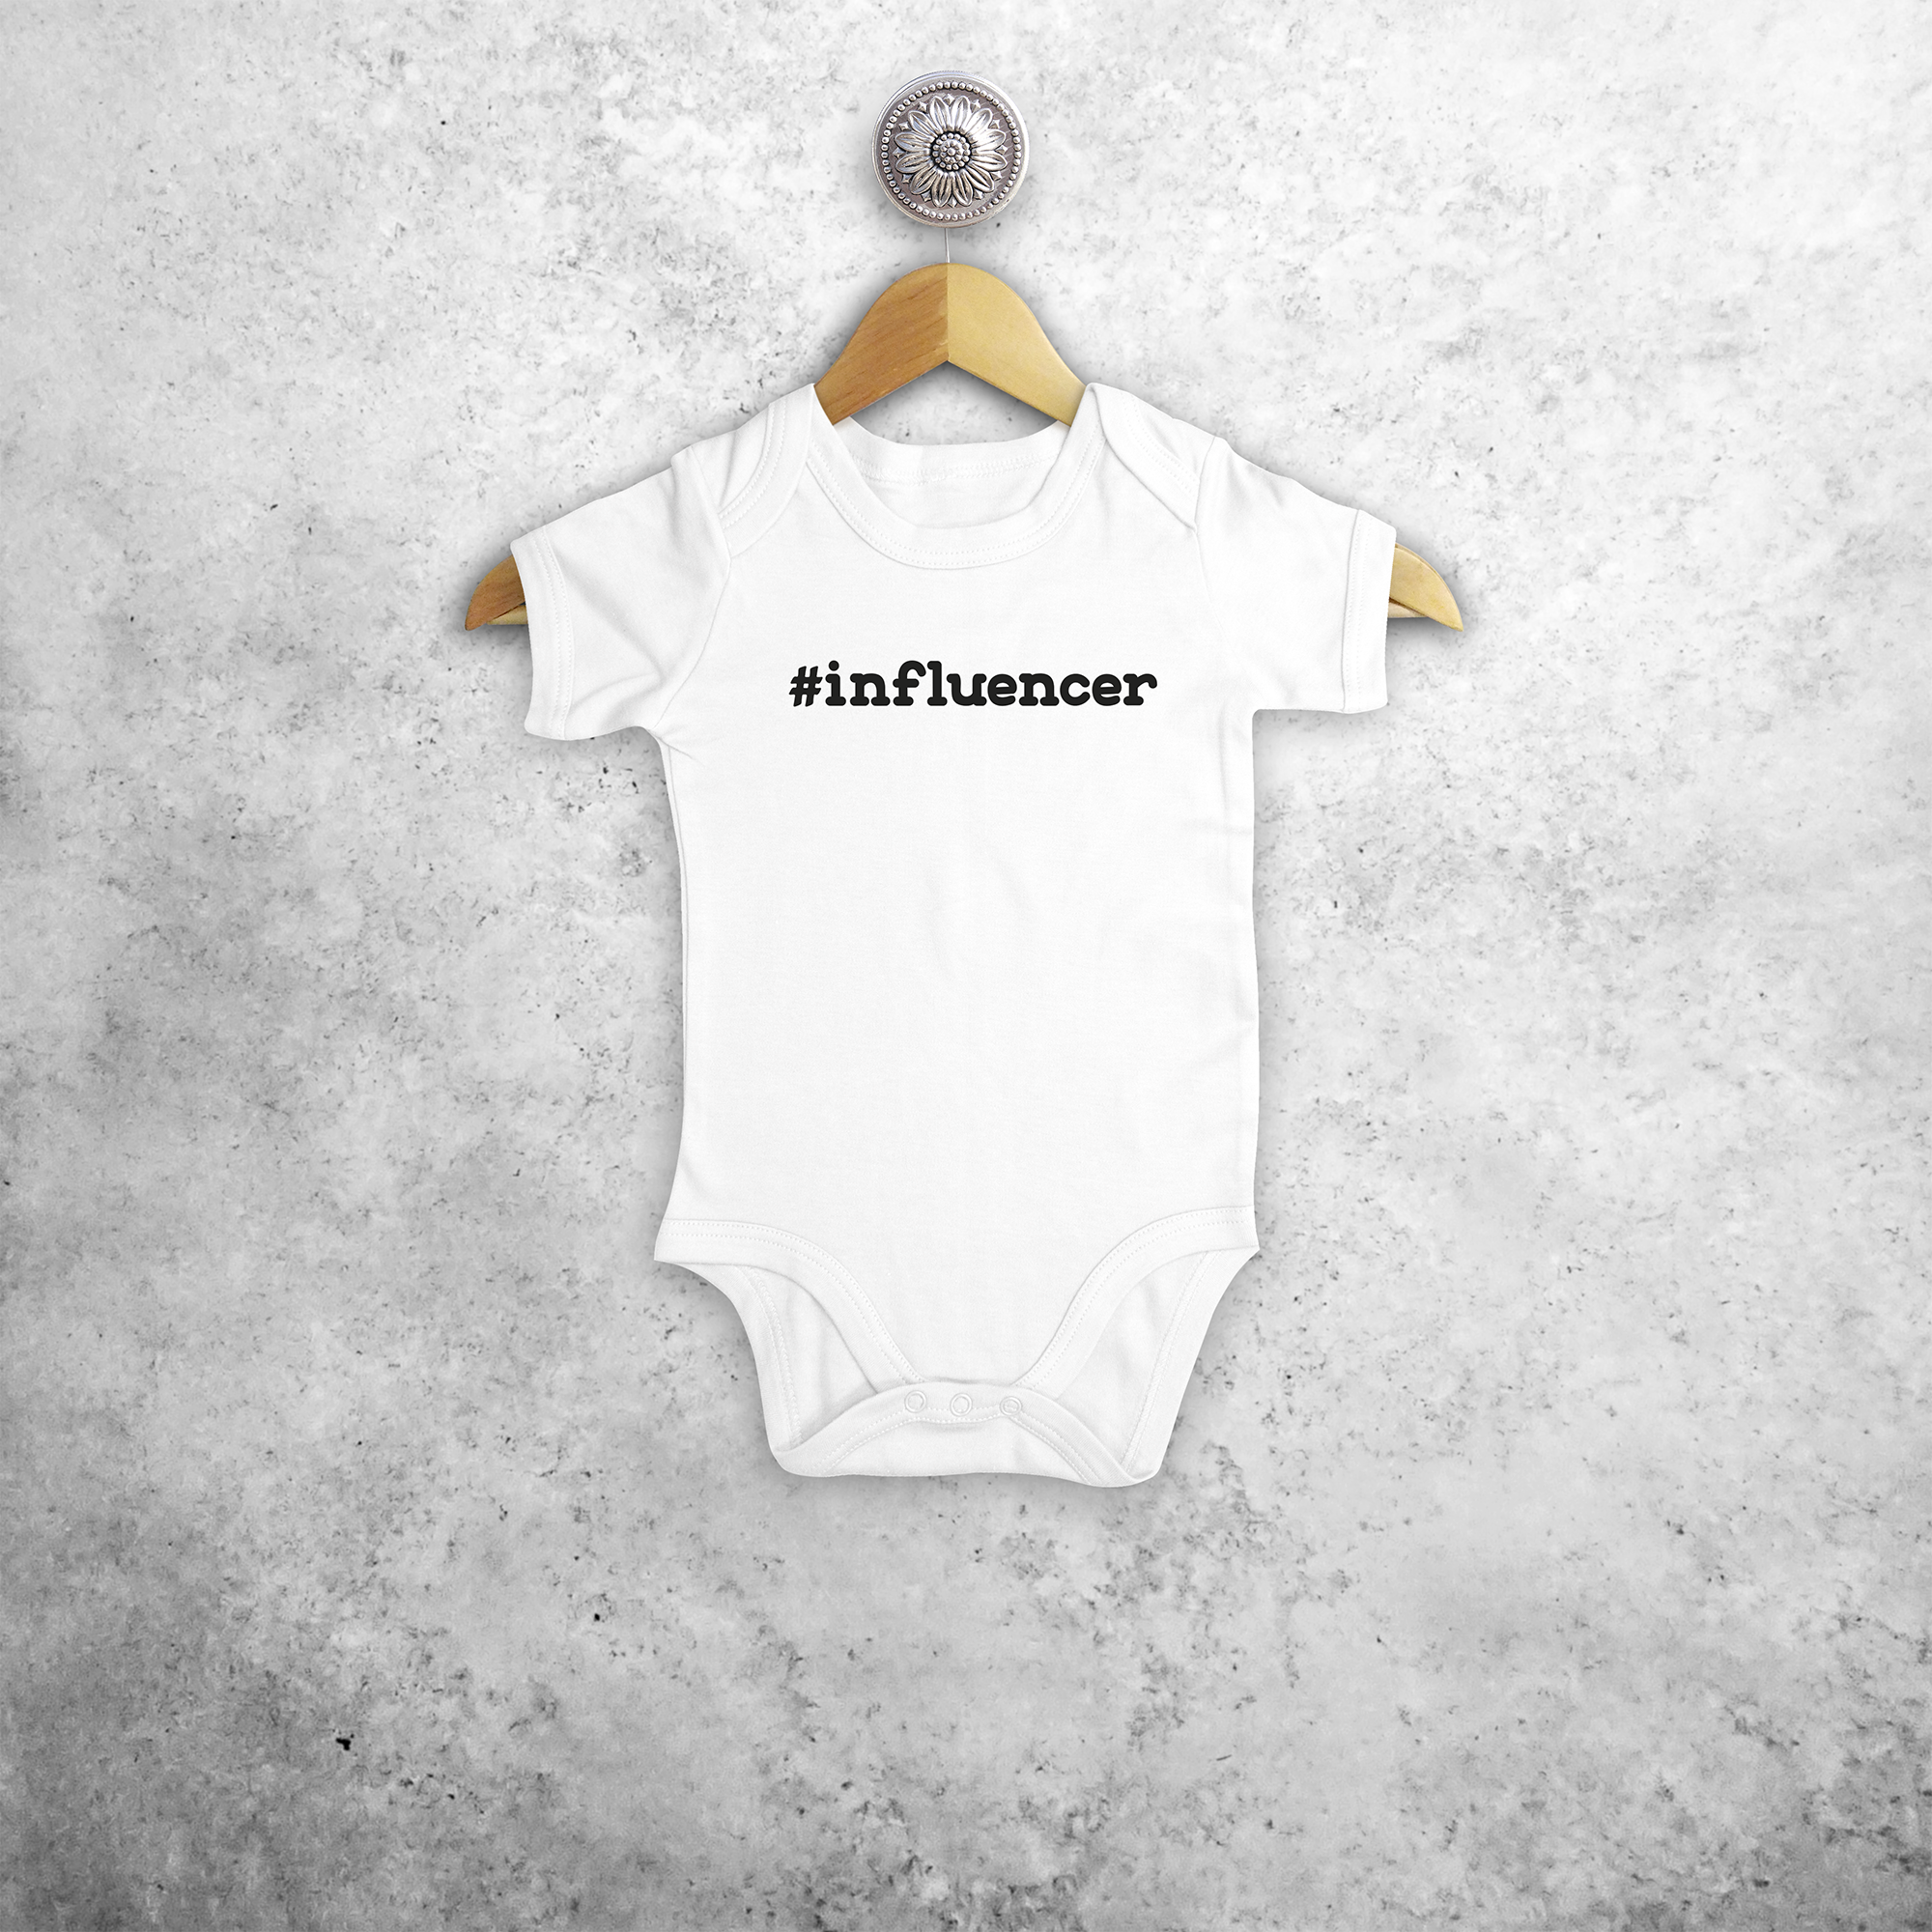 Baby or toddler bodysuit with short sleeves, with '#influencer' print by KMLeon.